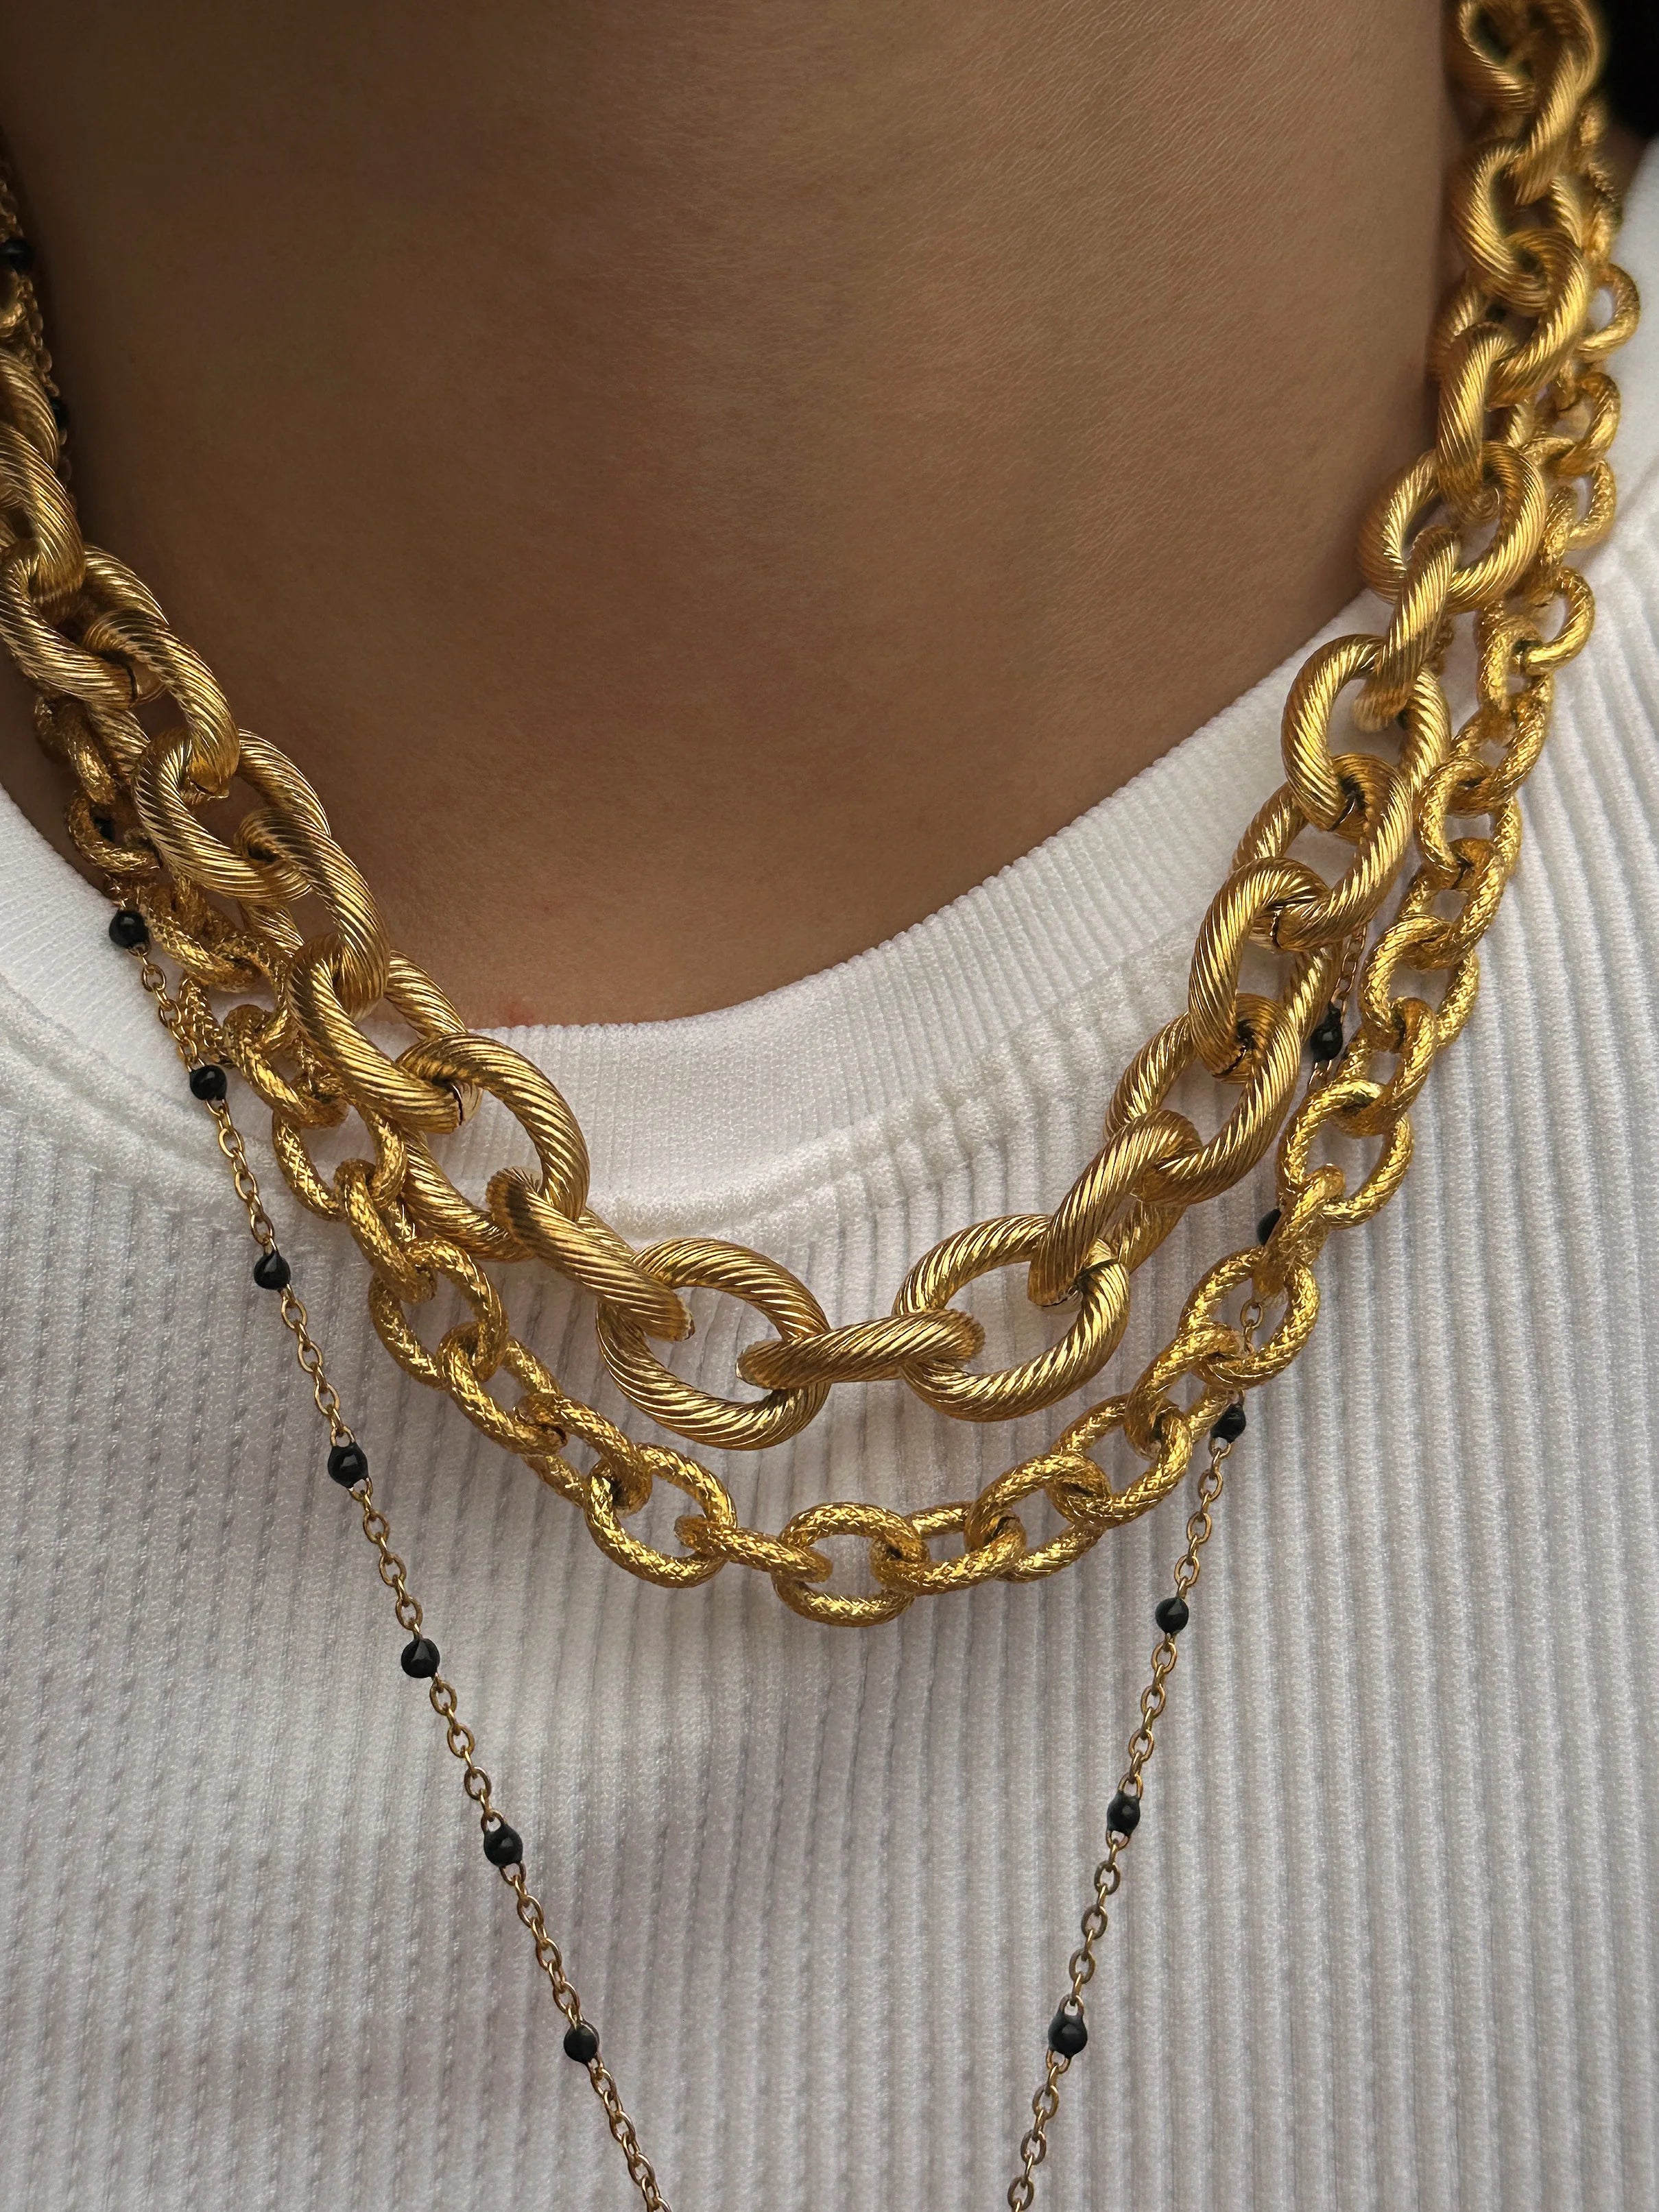 The Sexy or Nothing Threaded Rope Necklace